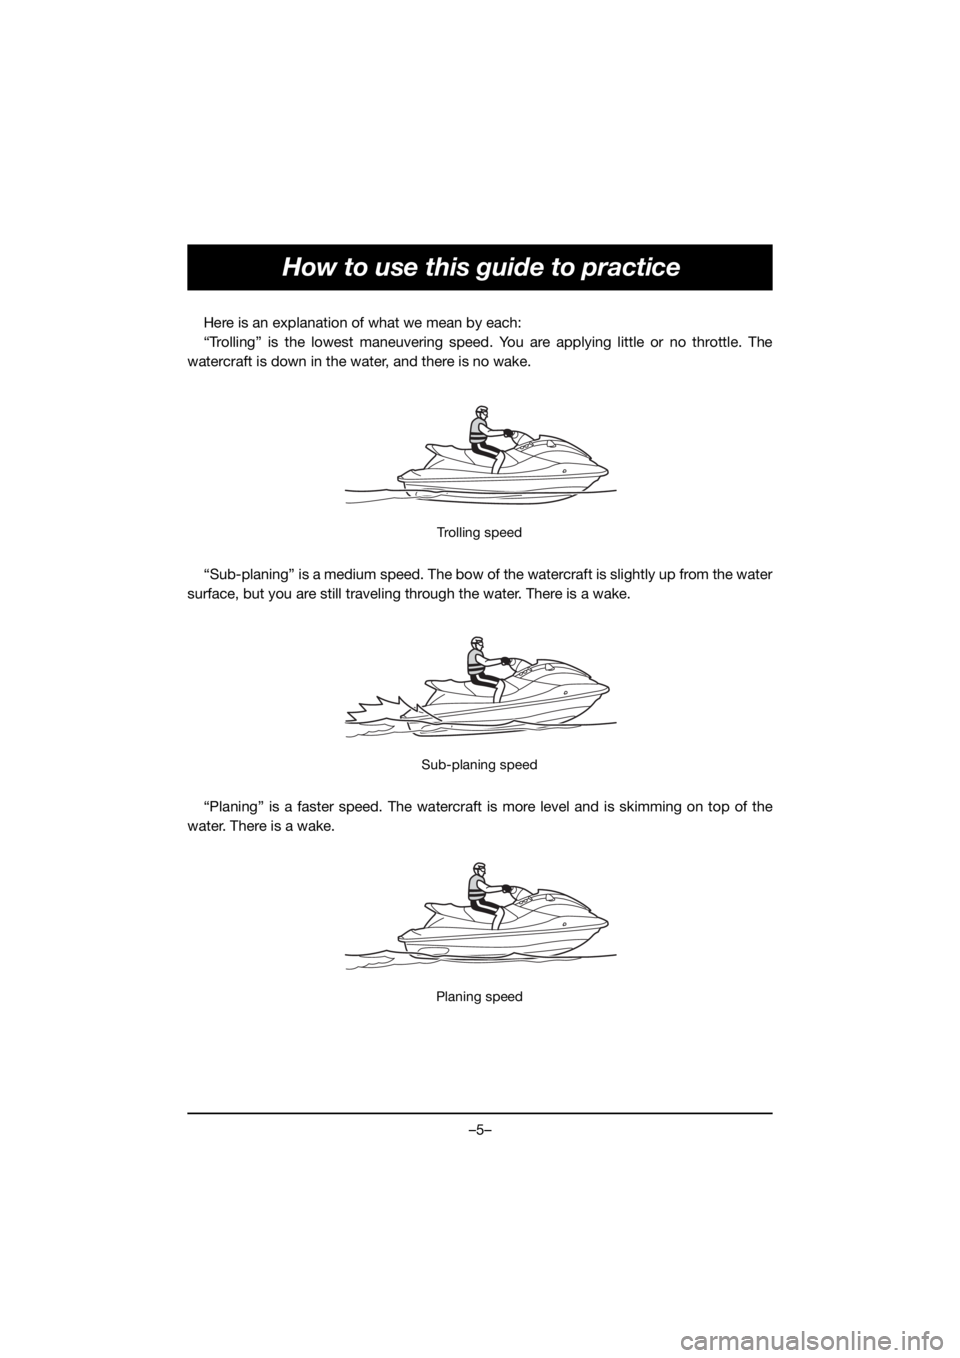 YAMAHA VX CRUISER HO 2021  Manuale de Empleo (in Spanish) –5–
How to use this guide to practice
Here is an explanation of what we mean by each:
“Trolling” is the lowest maneuvering speed. You are applying little or no throttle. The
watercraft is down